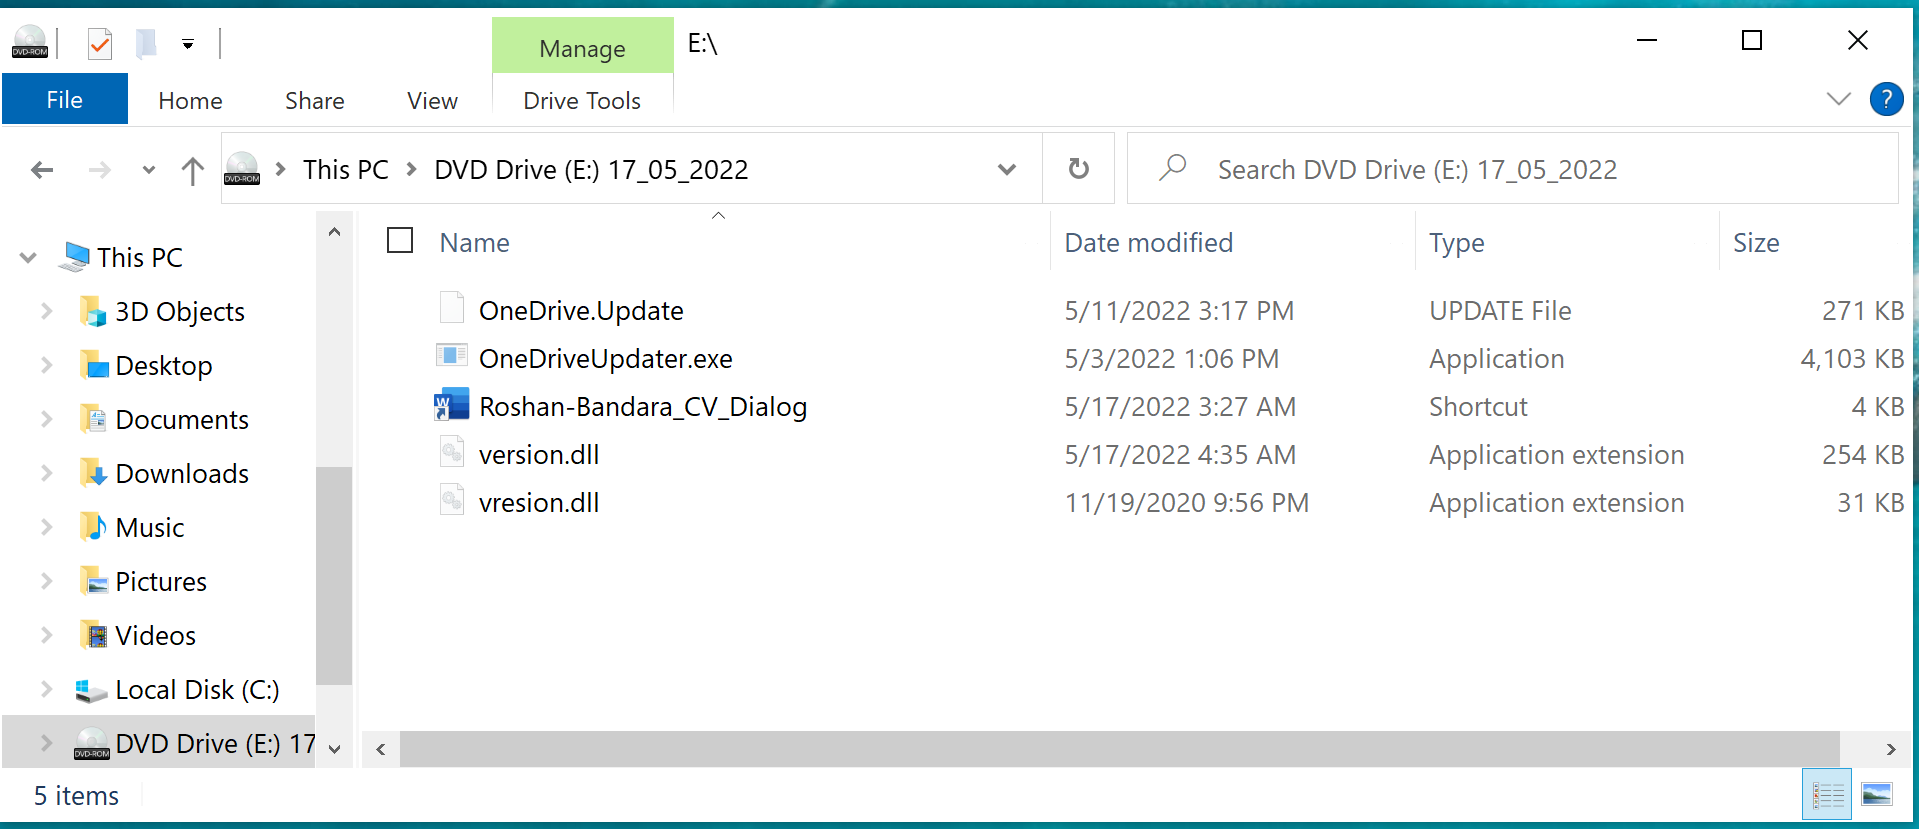 With "show hidden files" enabled, more files are visible: Roshan-Bandara-CV-Dialog, version.dll, vresion.dll, OneDrive.Update, OneDriveUpdater.exe